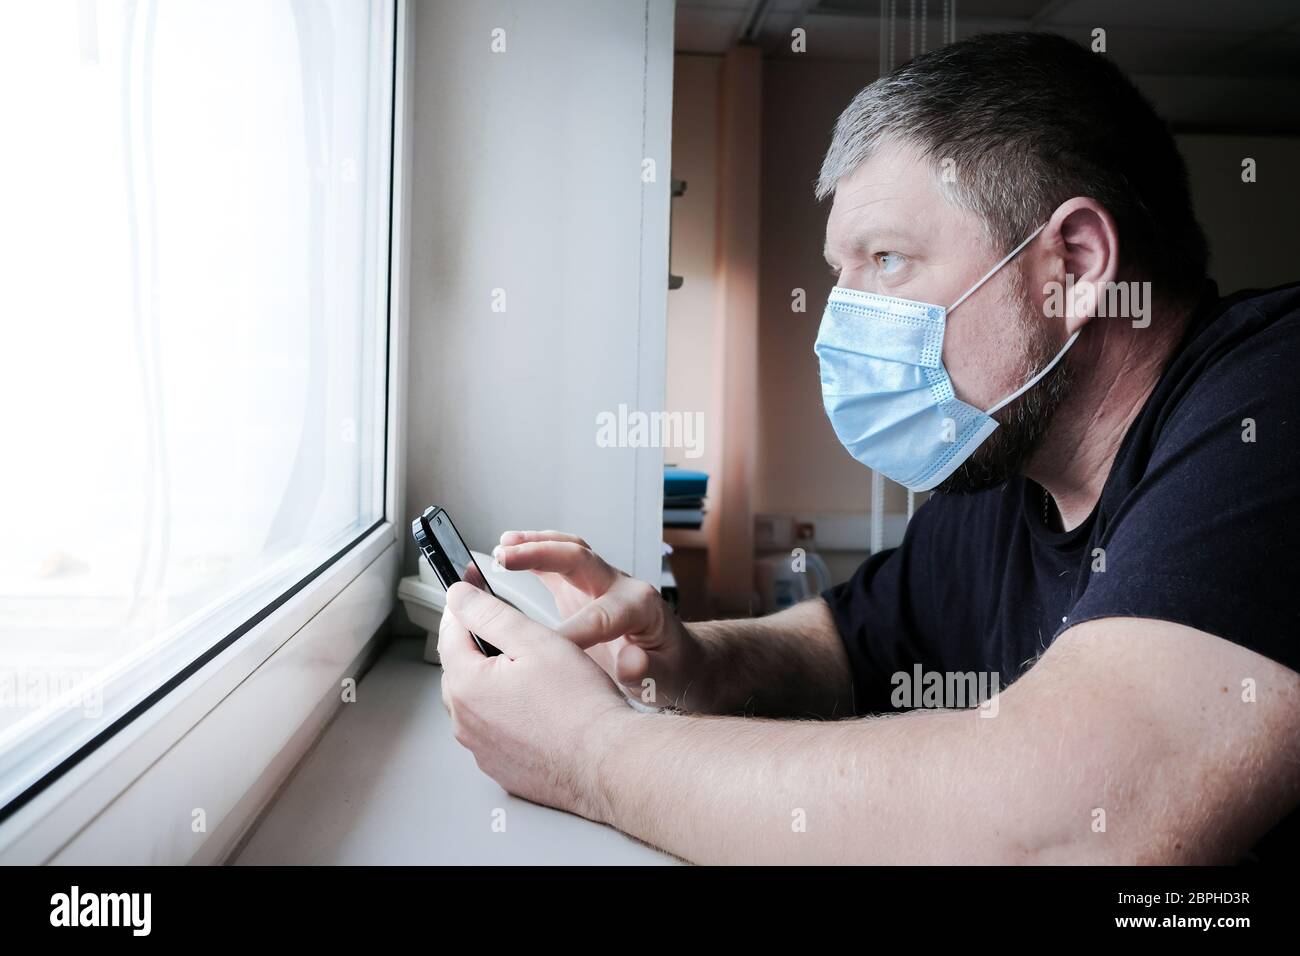 A man in a medical mask in front of the window holds a smartphone in his hands and looks anxiously out the window. He worries about family health duri Stock Photo